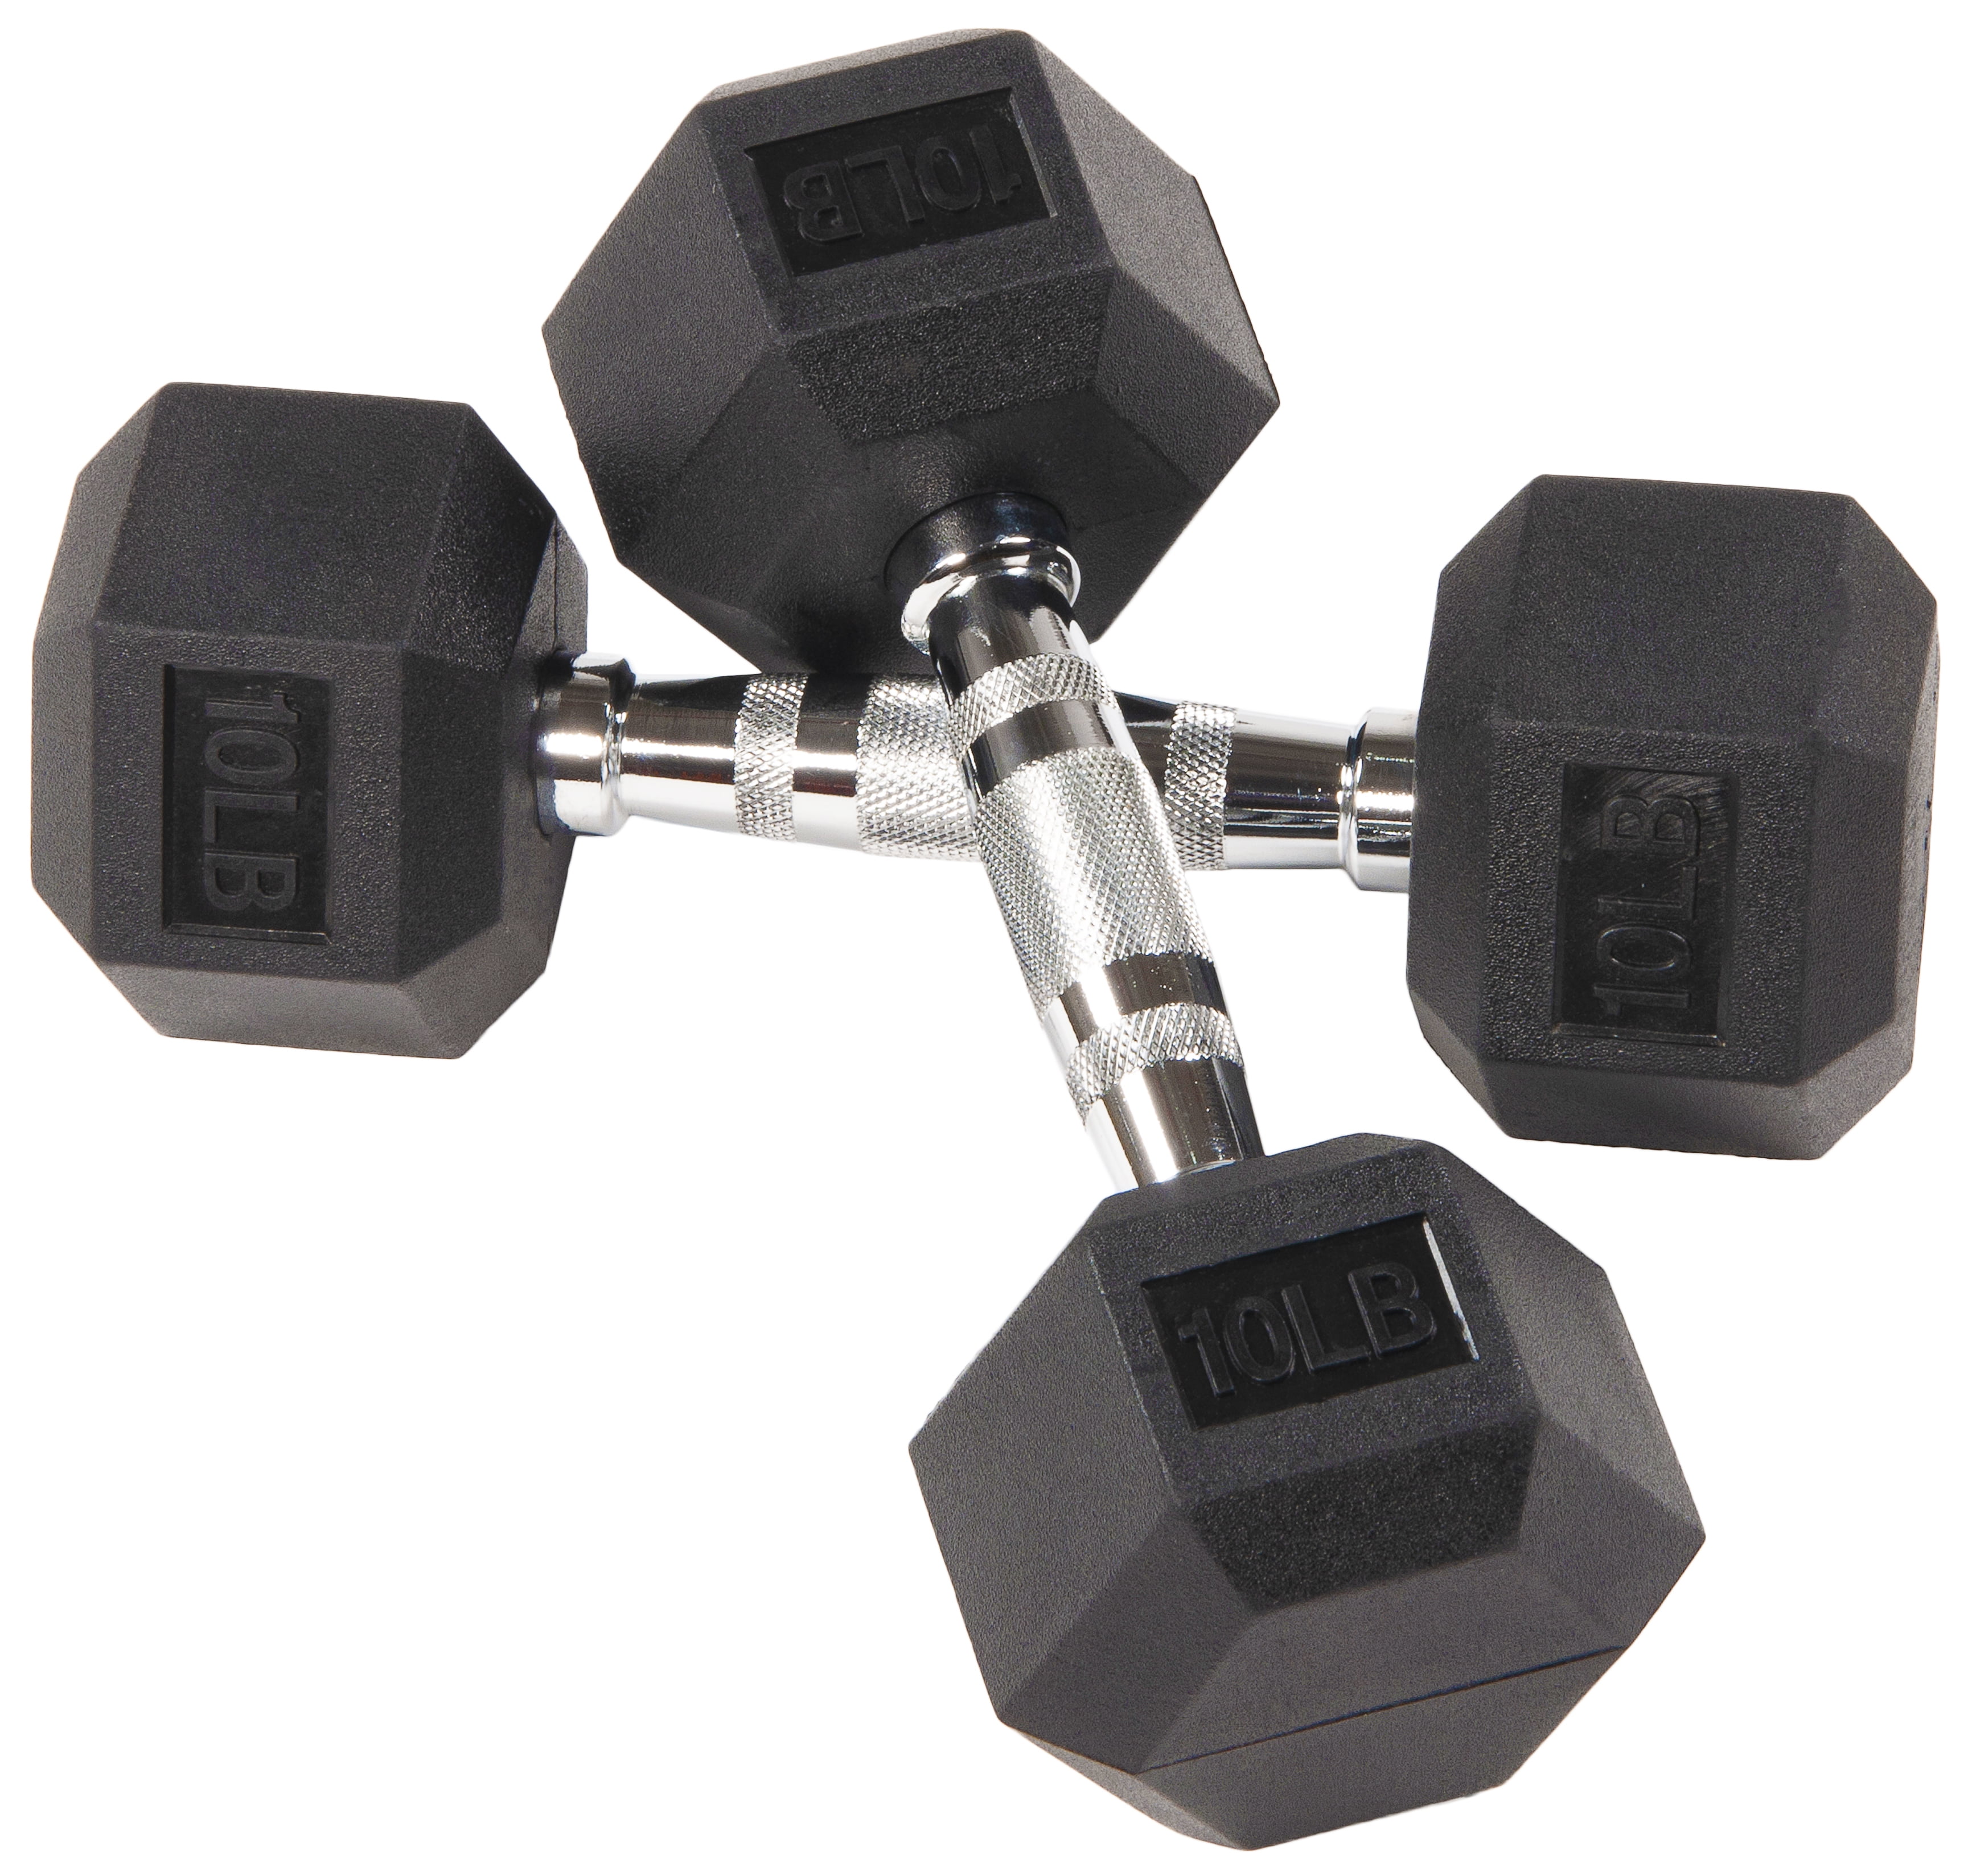 CAP Neoprene Hex 3 LB Dumbbell Hand Weights Set of 2 Pair FREE FAST SHIPPING 